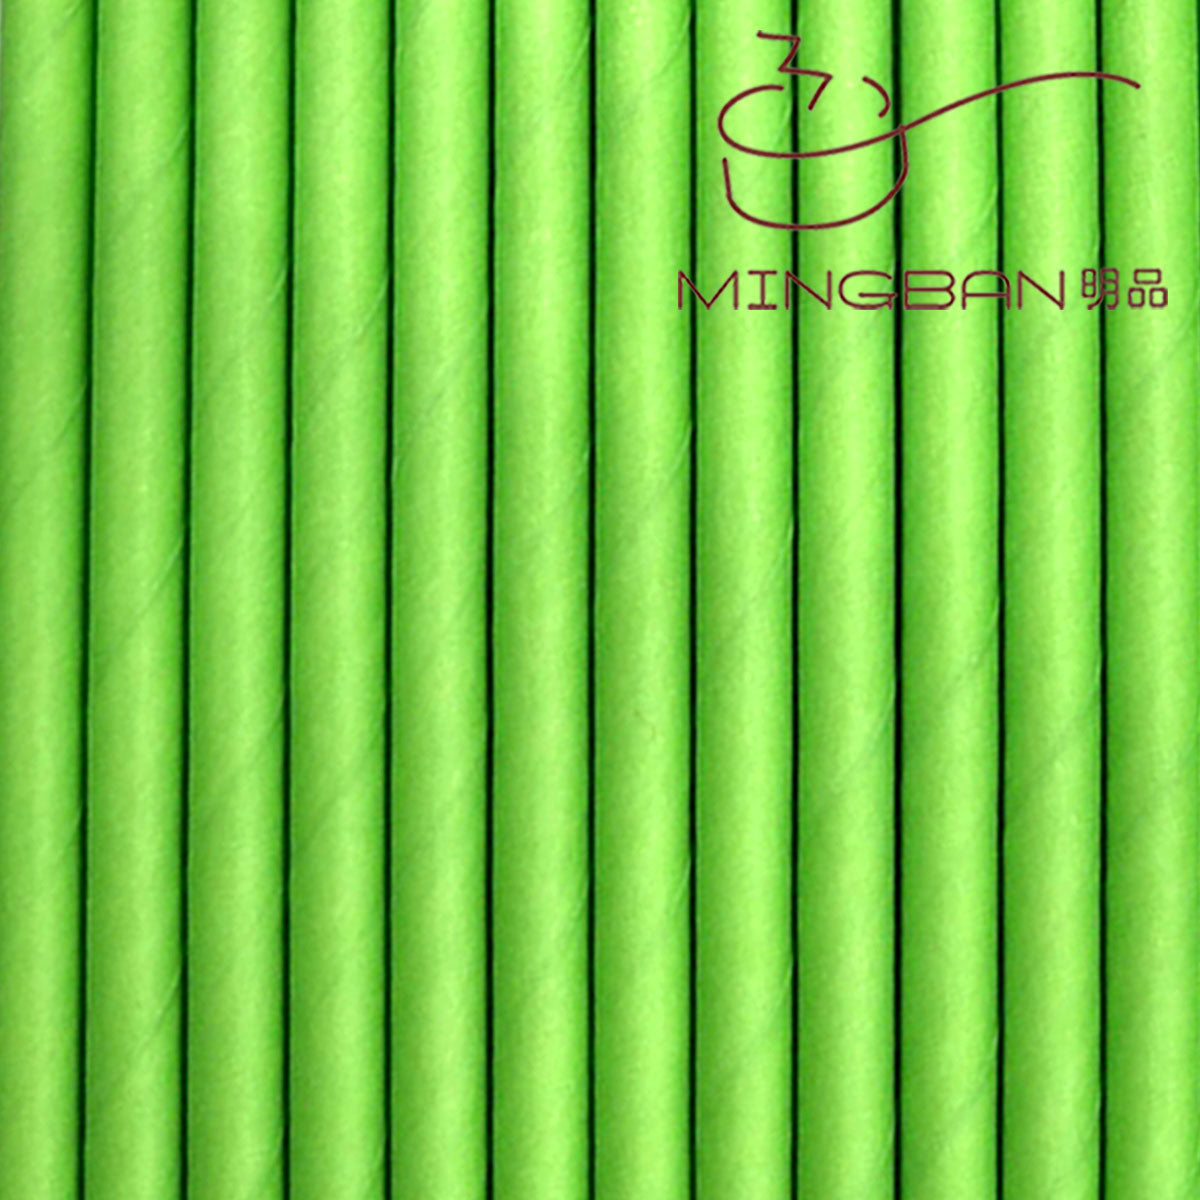 Eco-friendly Disposable Paper Straw - Green